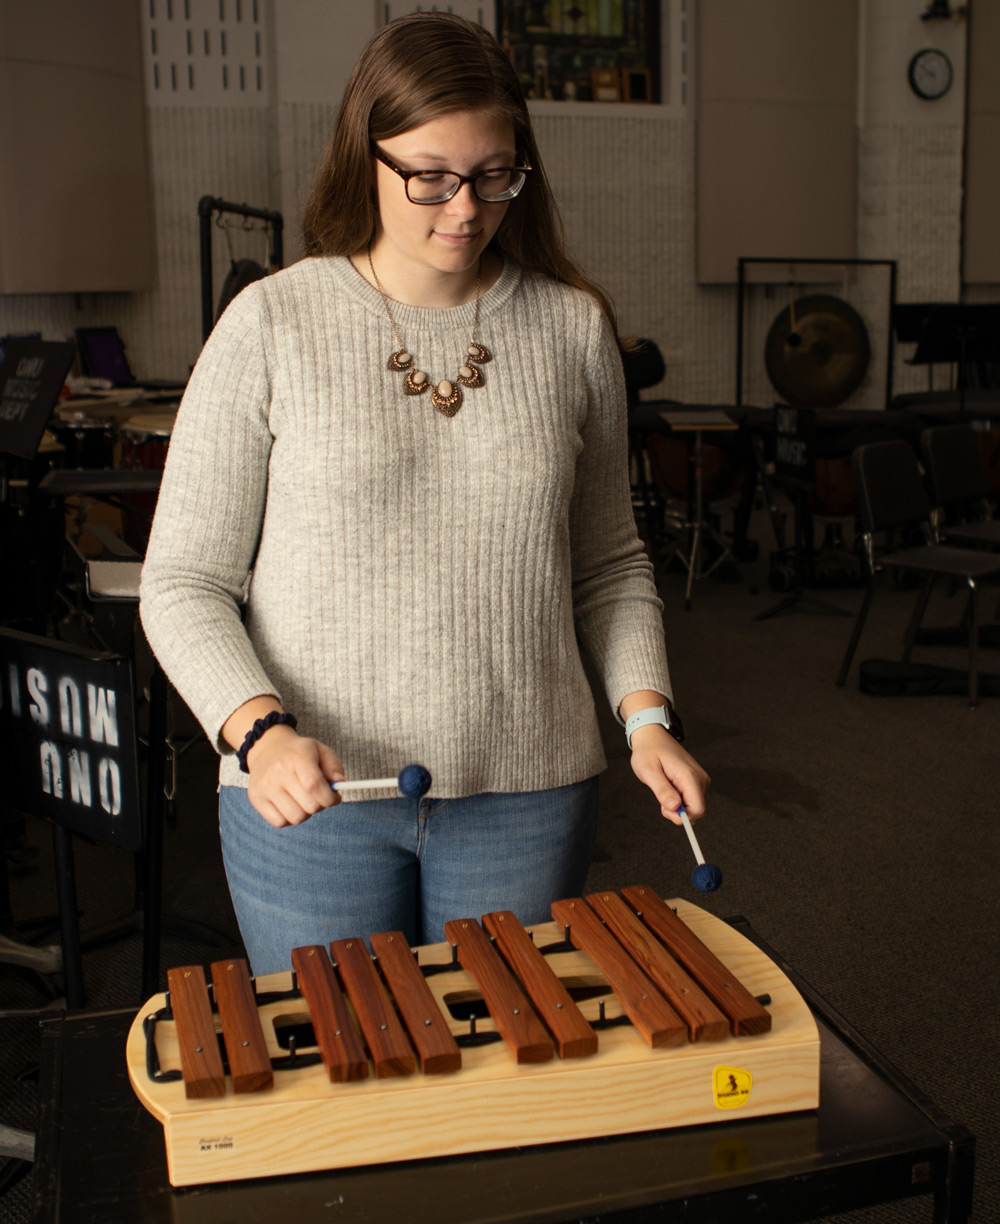 Student studies integrated music methods during a music education class.